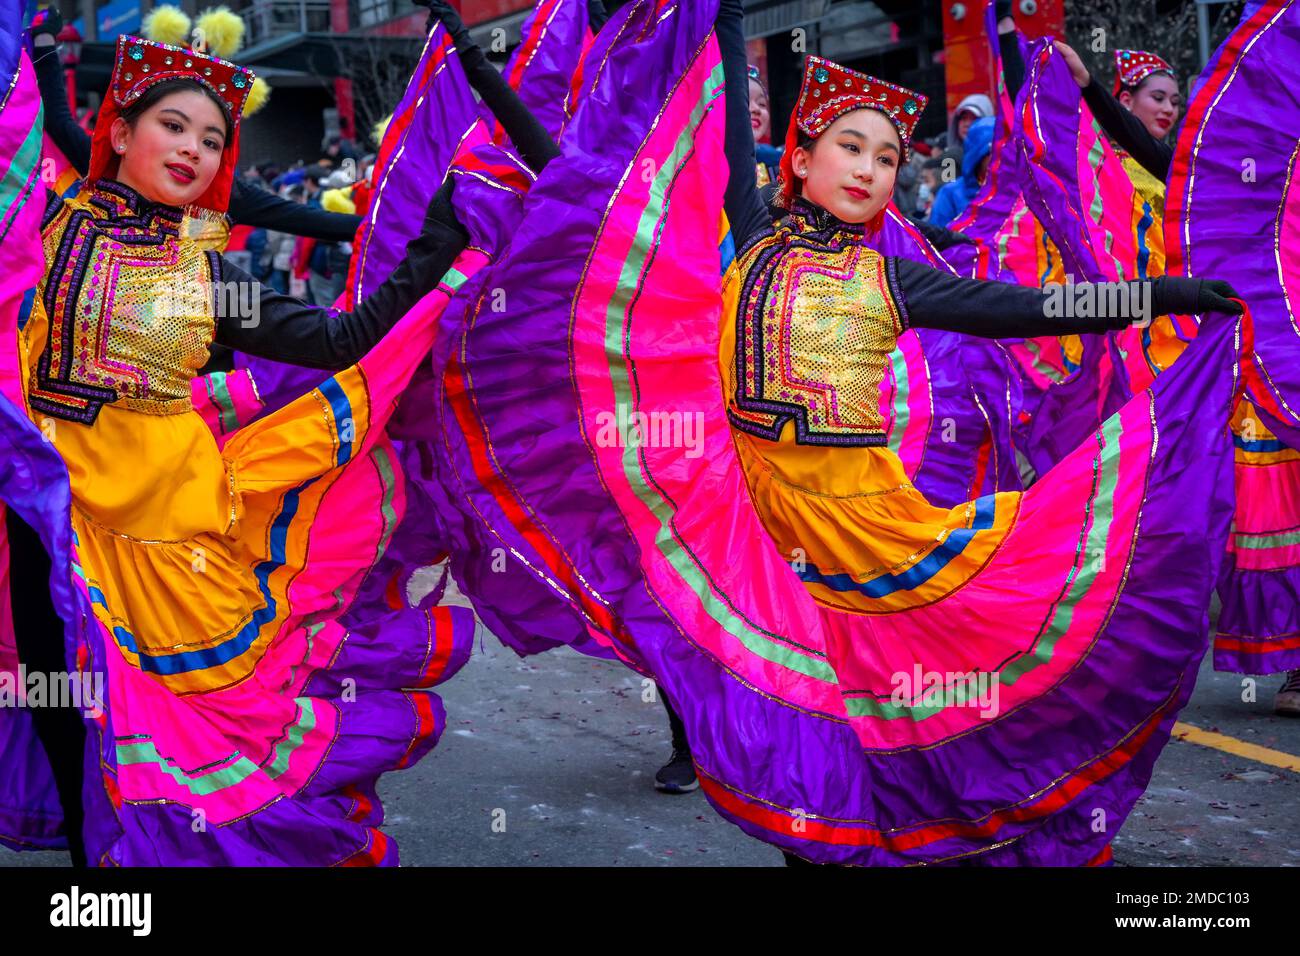 Dancers, Chinese Lunar New Year Parade, Chinatown, Vancouver, British Columbia, Canada Stock Photo